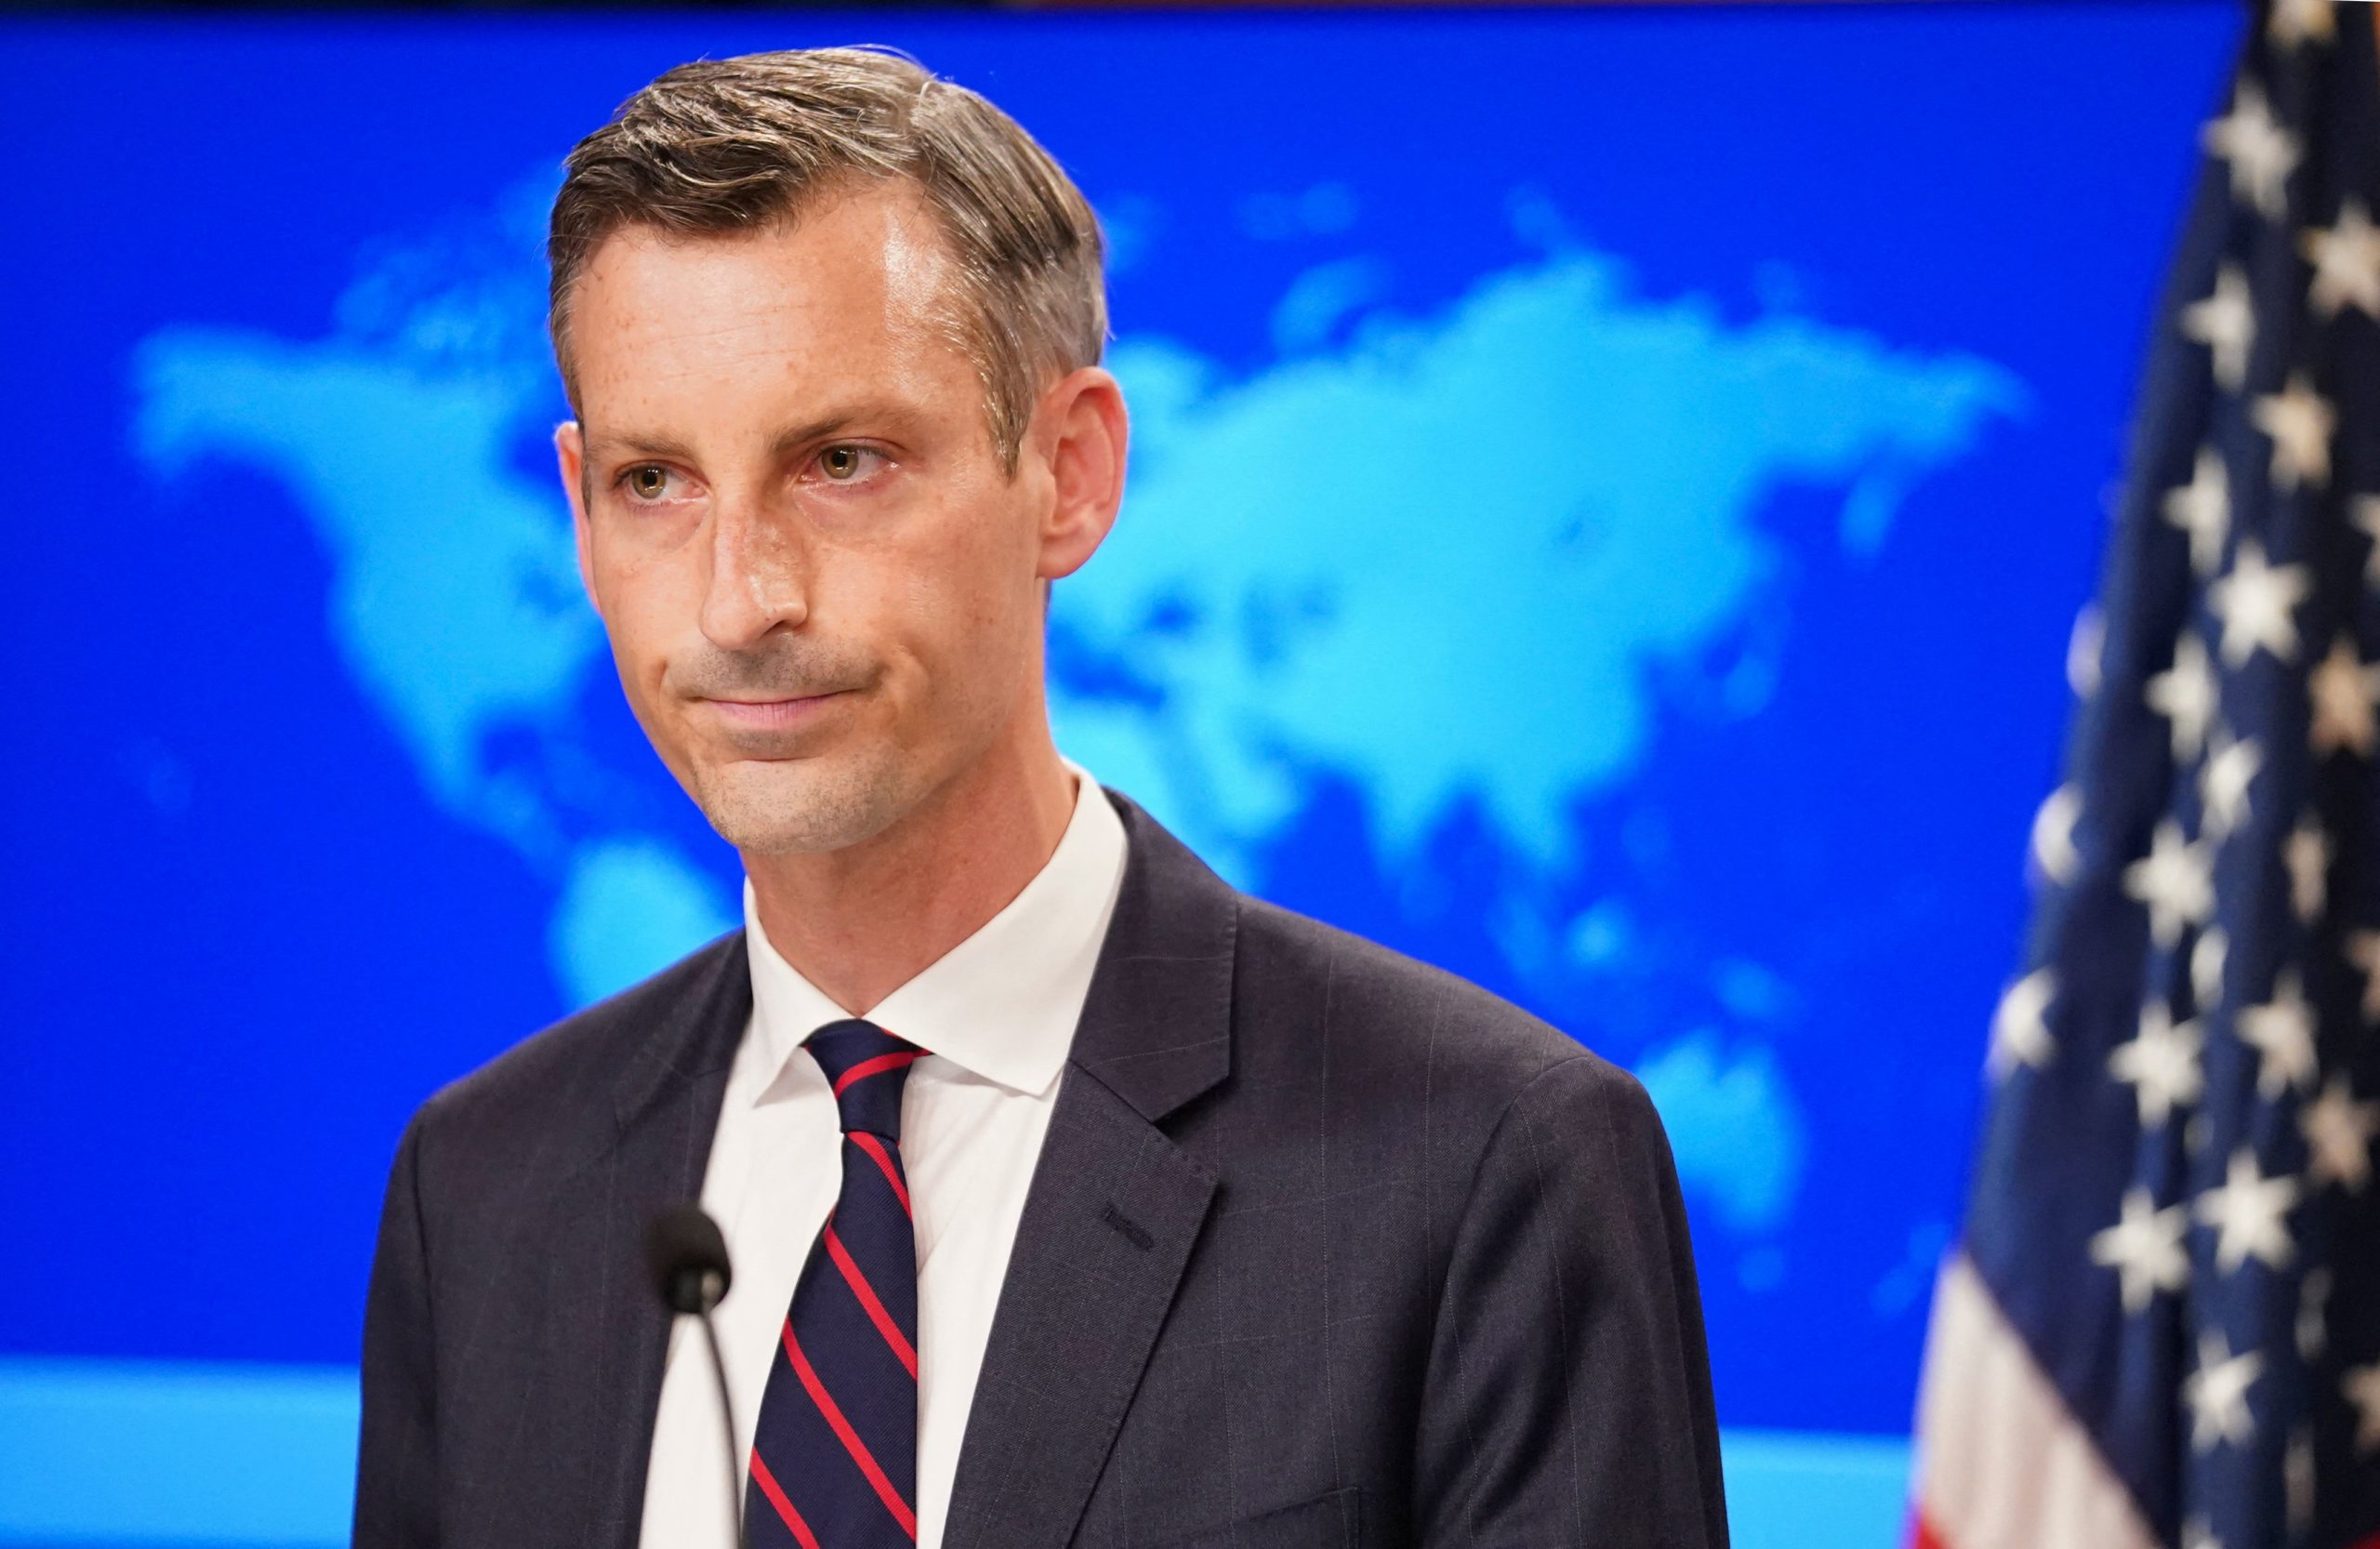 US State Department spokesman Ned Price holds a press briefing on Afghanistan at the State Department in Washington, DC, August 16, 2021. (Photo by KEVIN LAMARQUE / POOL / AFP) (Photo by KEVIN LAMARQUE/POOL/AFP via Getty Images)